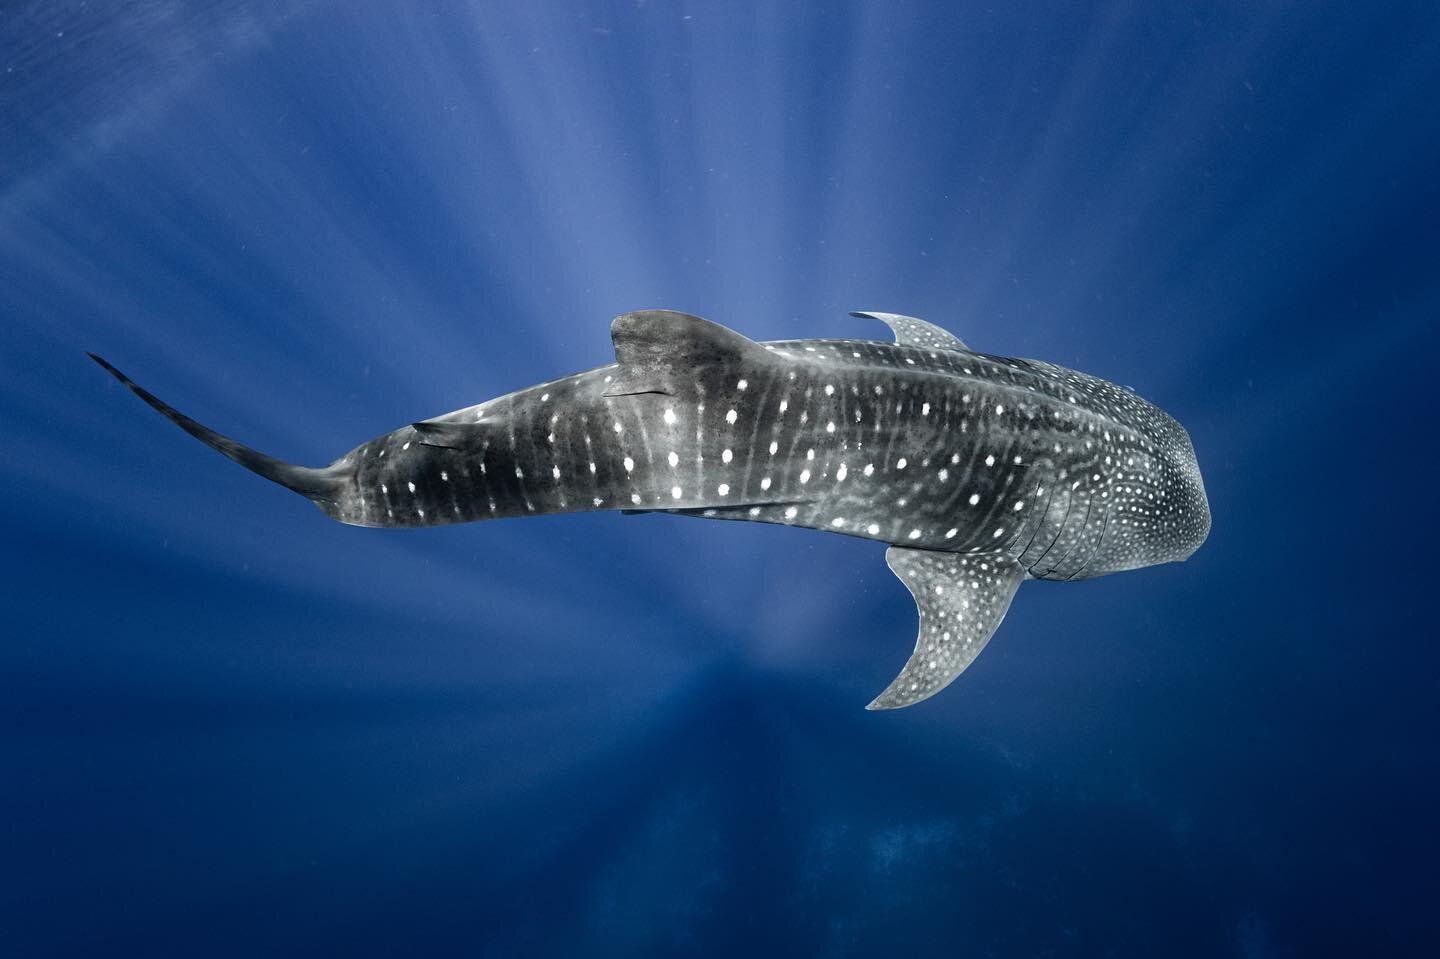 Whale of a shark and the largest fish in the ocean. Whale sharks are still a mystery, where do they come from and where do they go? Australia&rsquo;s west coast has an annual aggregation on the Ningaloo reef in late autumn /winter. In times past ther